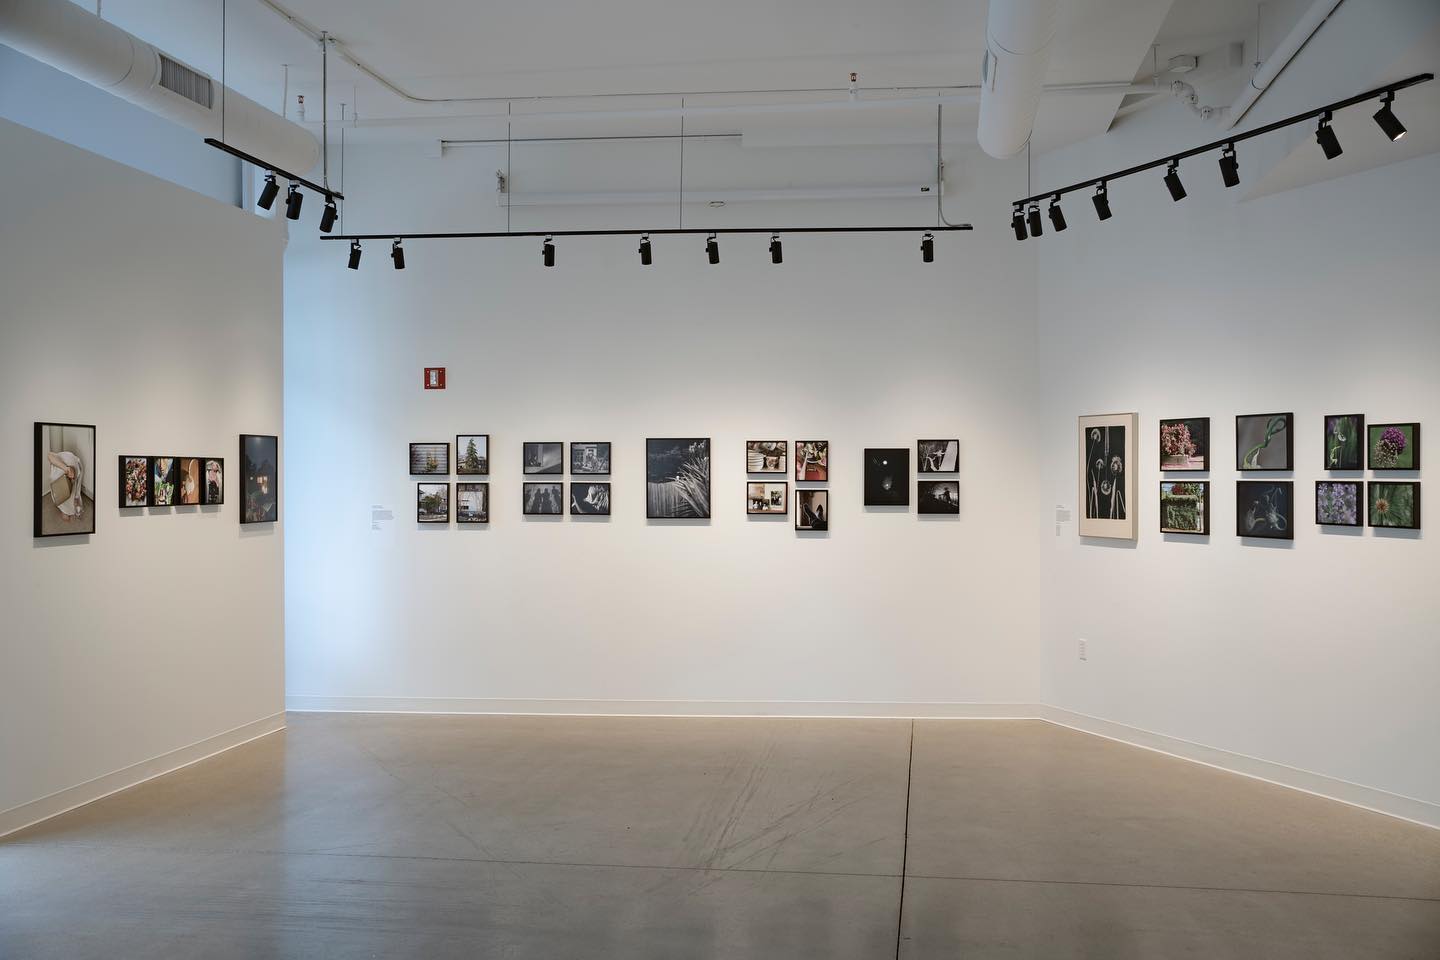 Image of a photo gallery with white walls and photographs